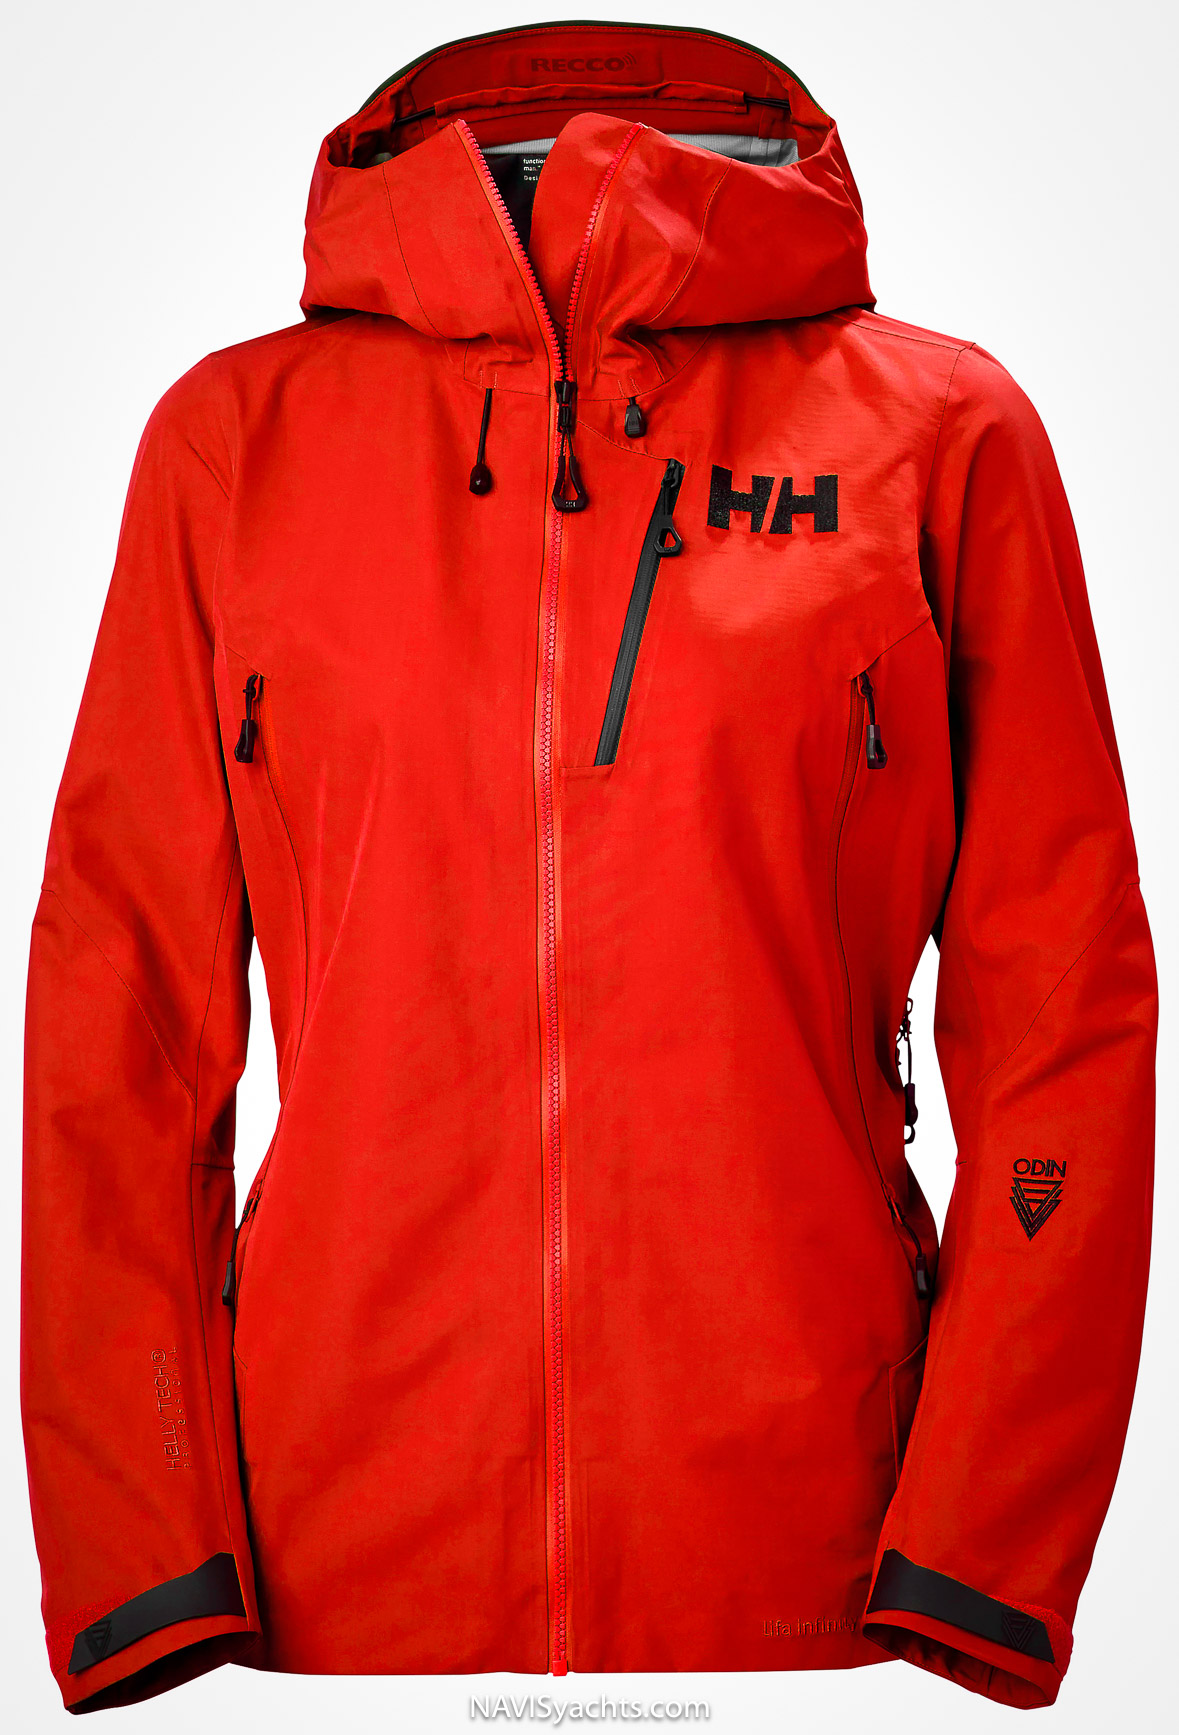 Women's Odin 9 Worlds Infinity Shell Jacket by Helly Hansen with LIFA INFINITY™ membrane for sustainable outdoor adventures.